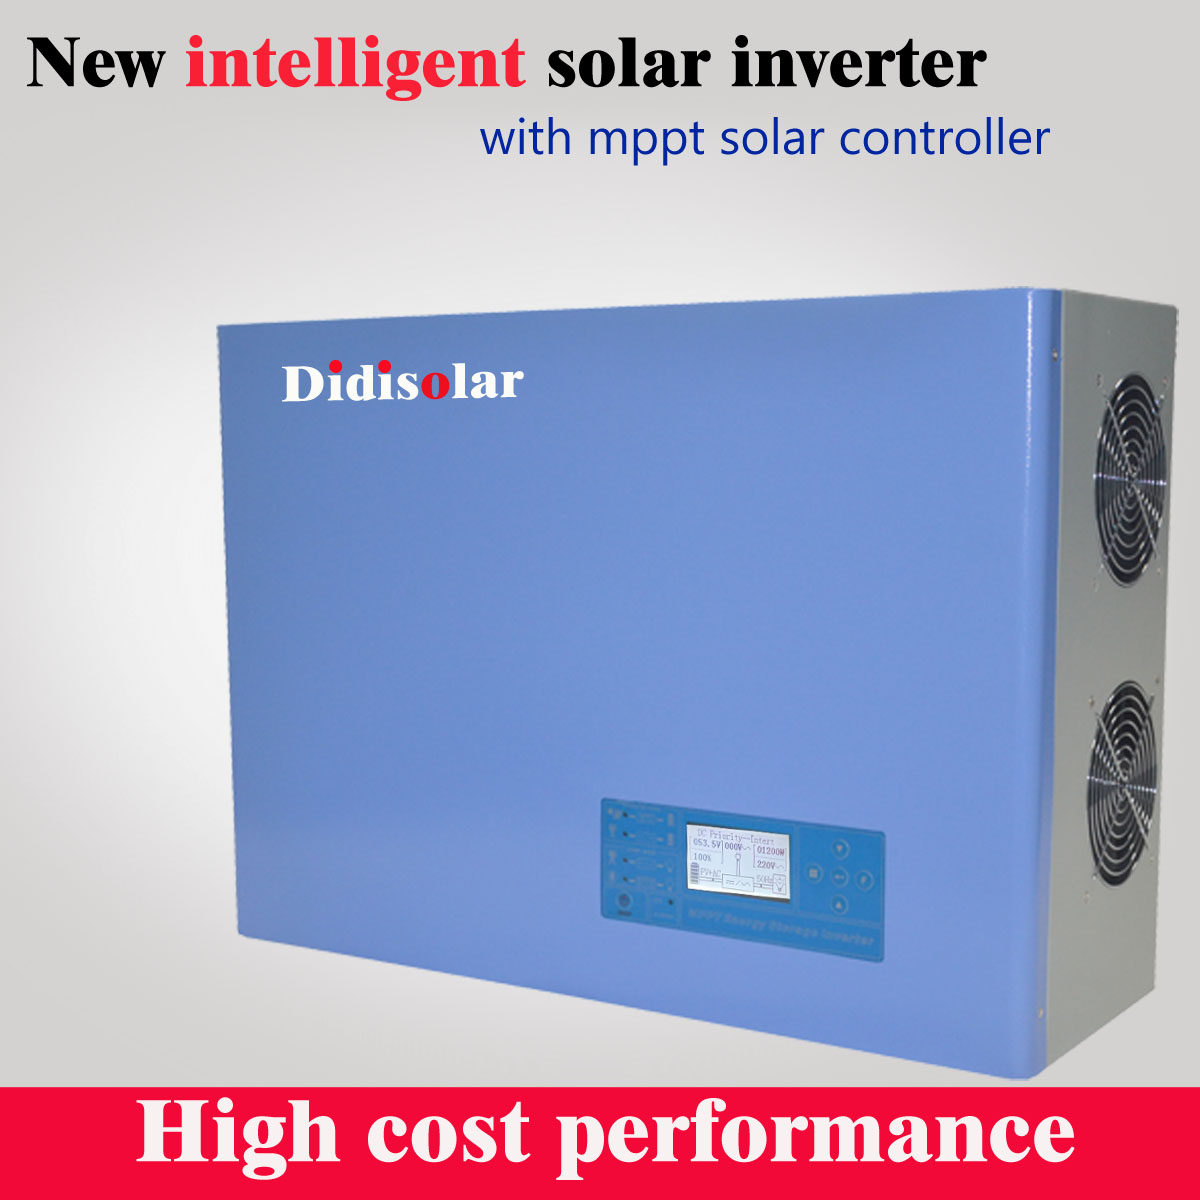 Introduction of various parameters of solar energy generation interface of energy storage inverter